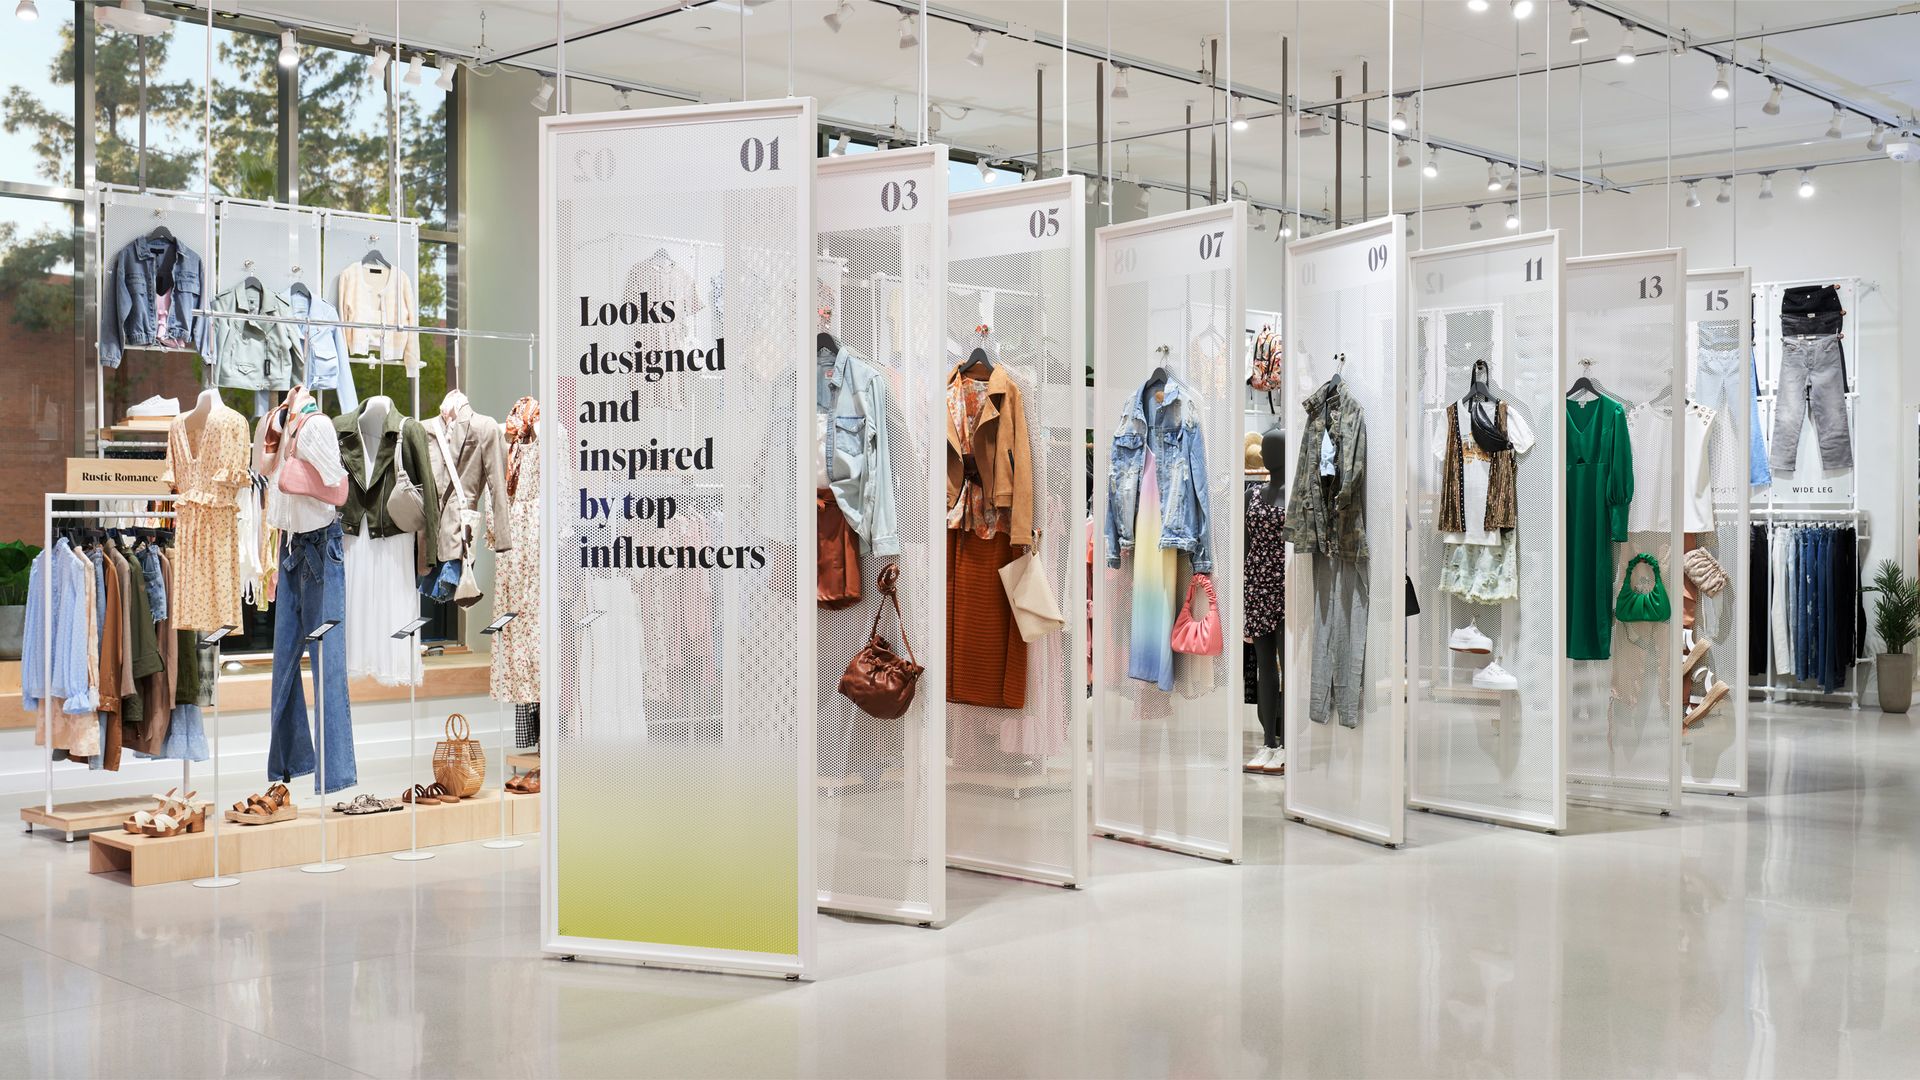 A row of outfits displayed on boards with a sign that says "Looks designed and inspired by top influencers"